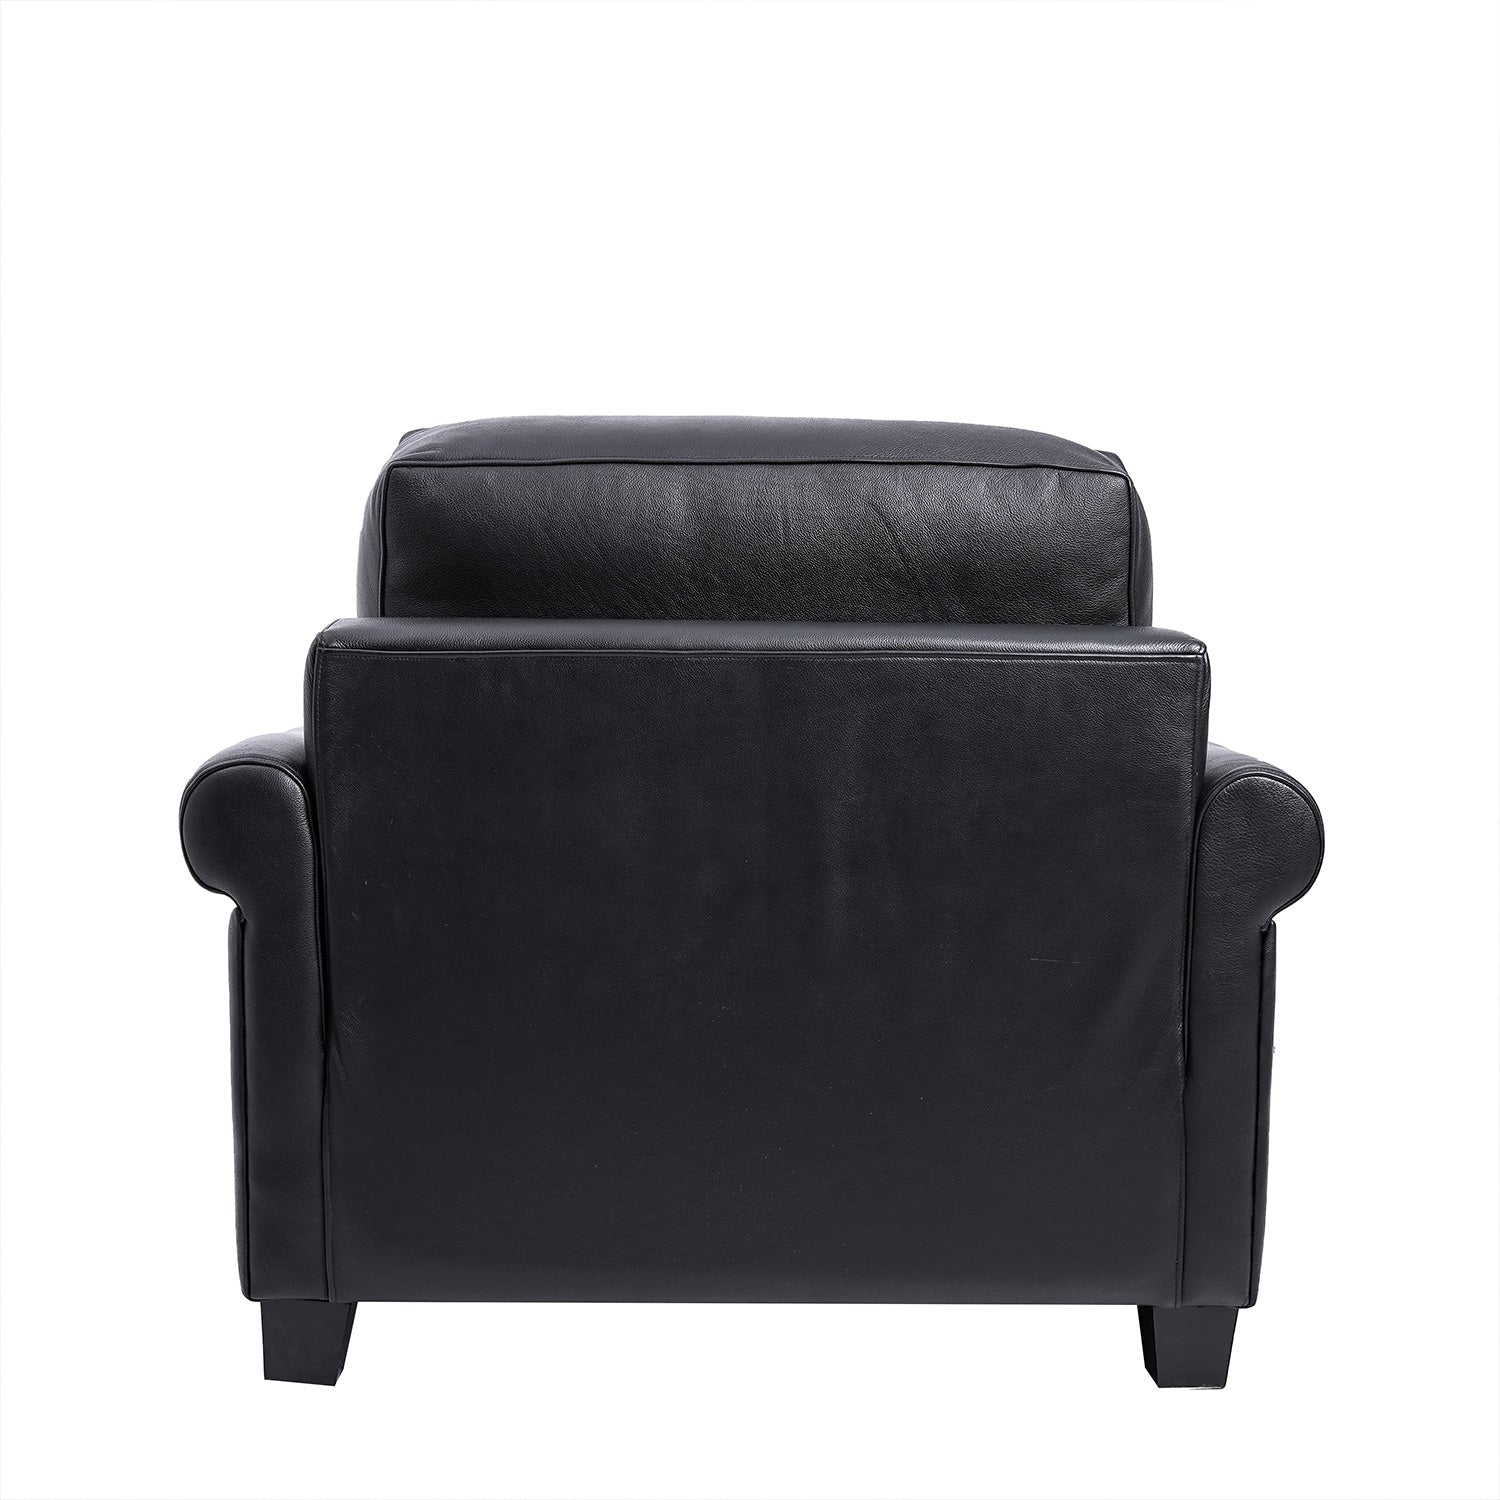 Rogers Vaca Leather Chair Coal Back